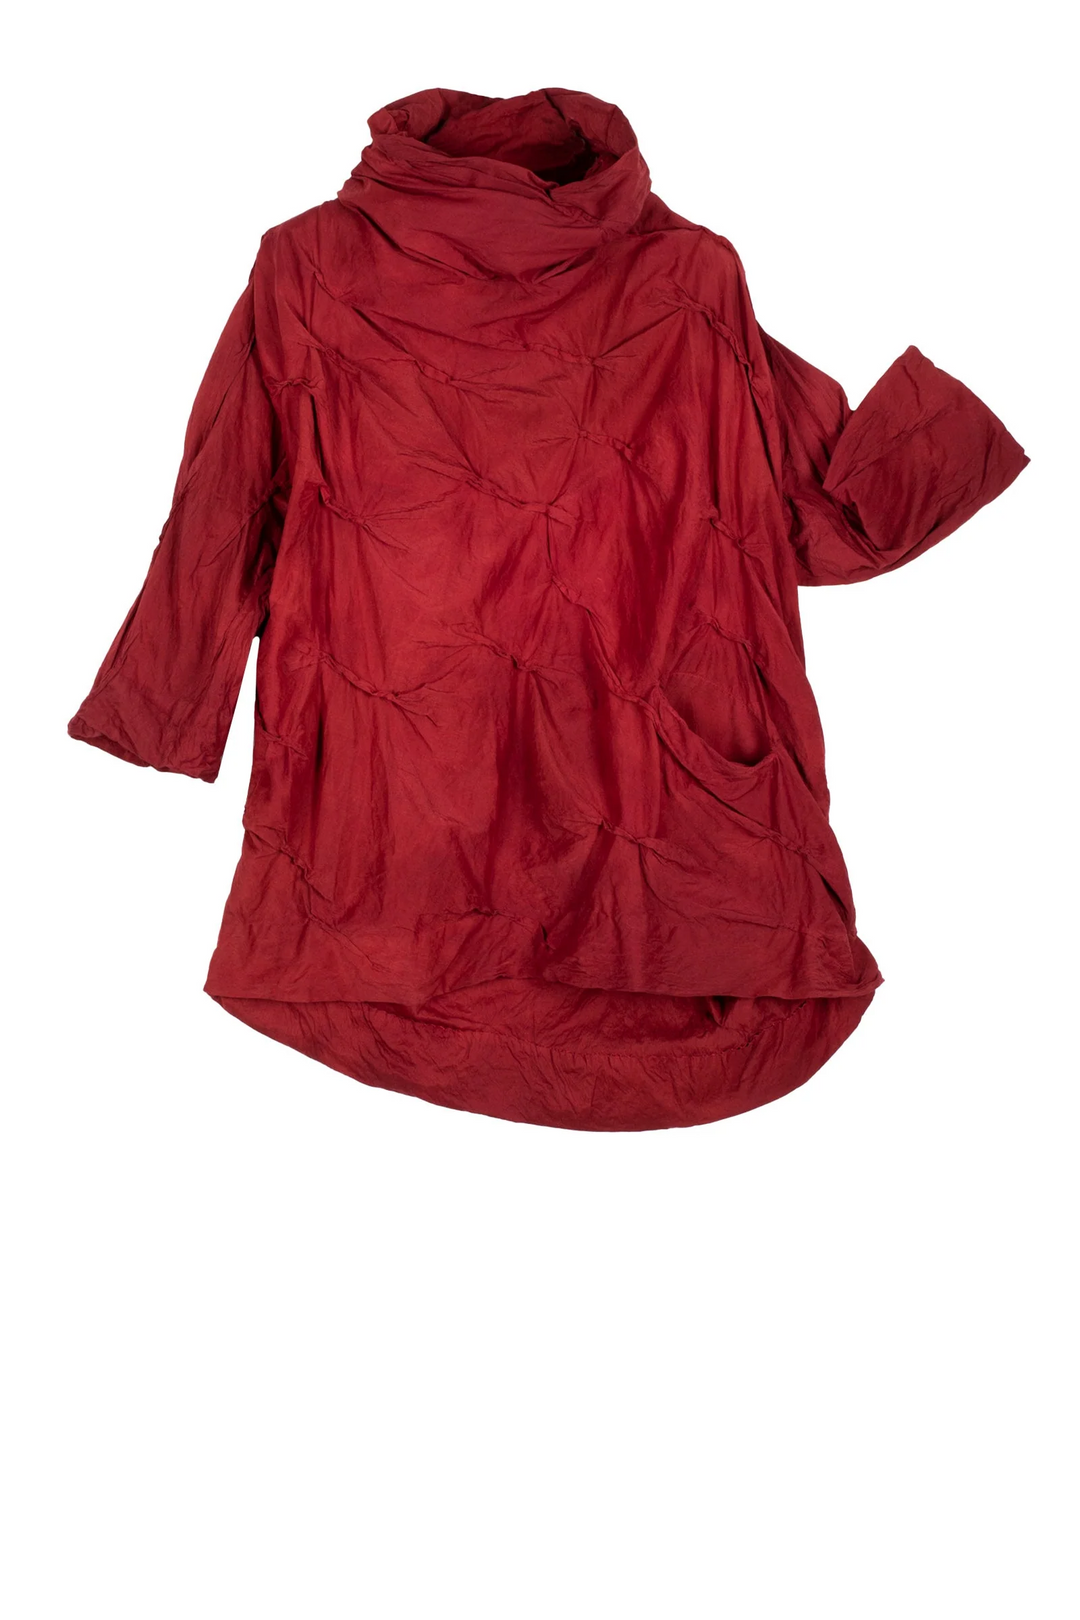 DYED COTTON SILK HEAVY VOILE WAVY TUCK PULLOVER - dh1552-red -